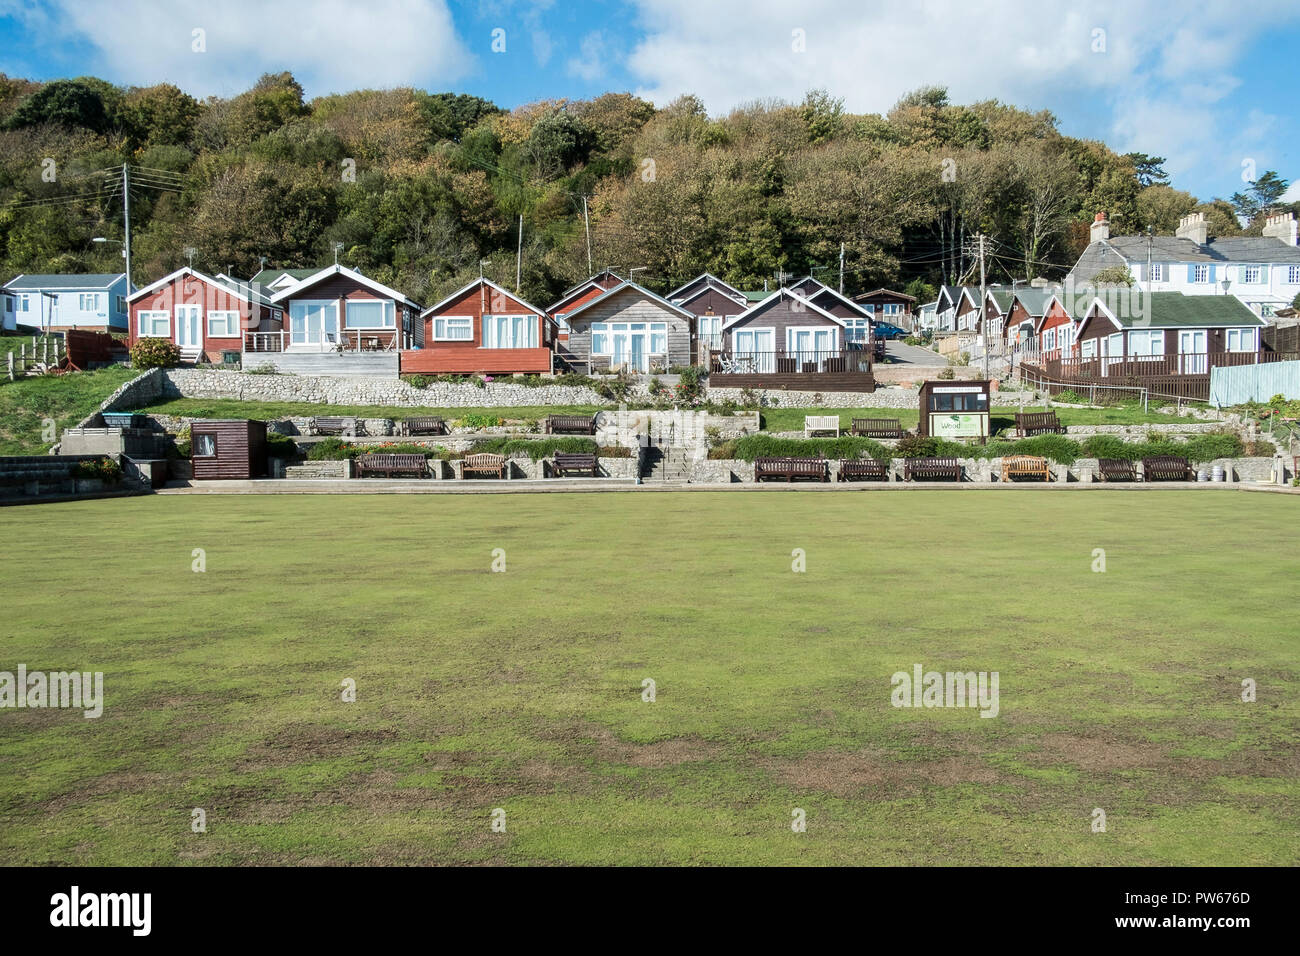 Holiday chalets overlooking Lyme Regis Bowling Club green in the coastal town of Lyme Regis in Dorset. Stock Photo